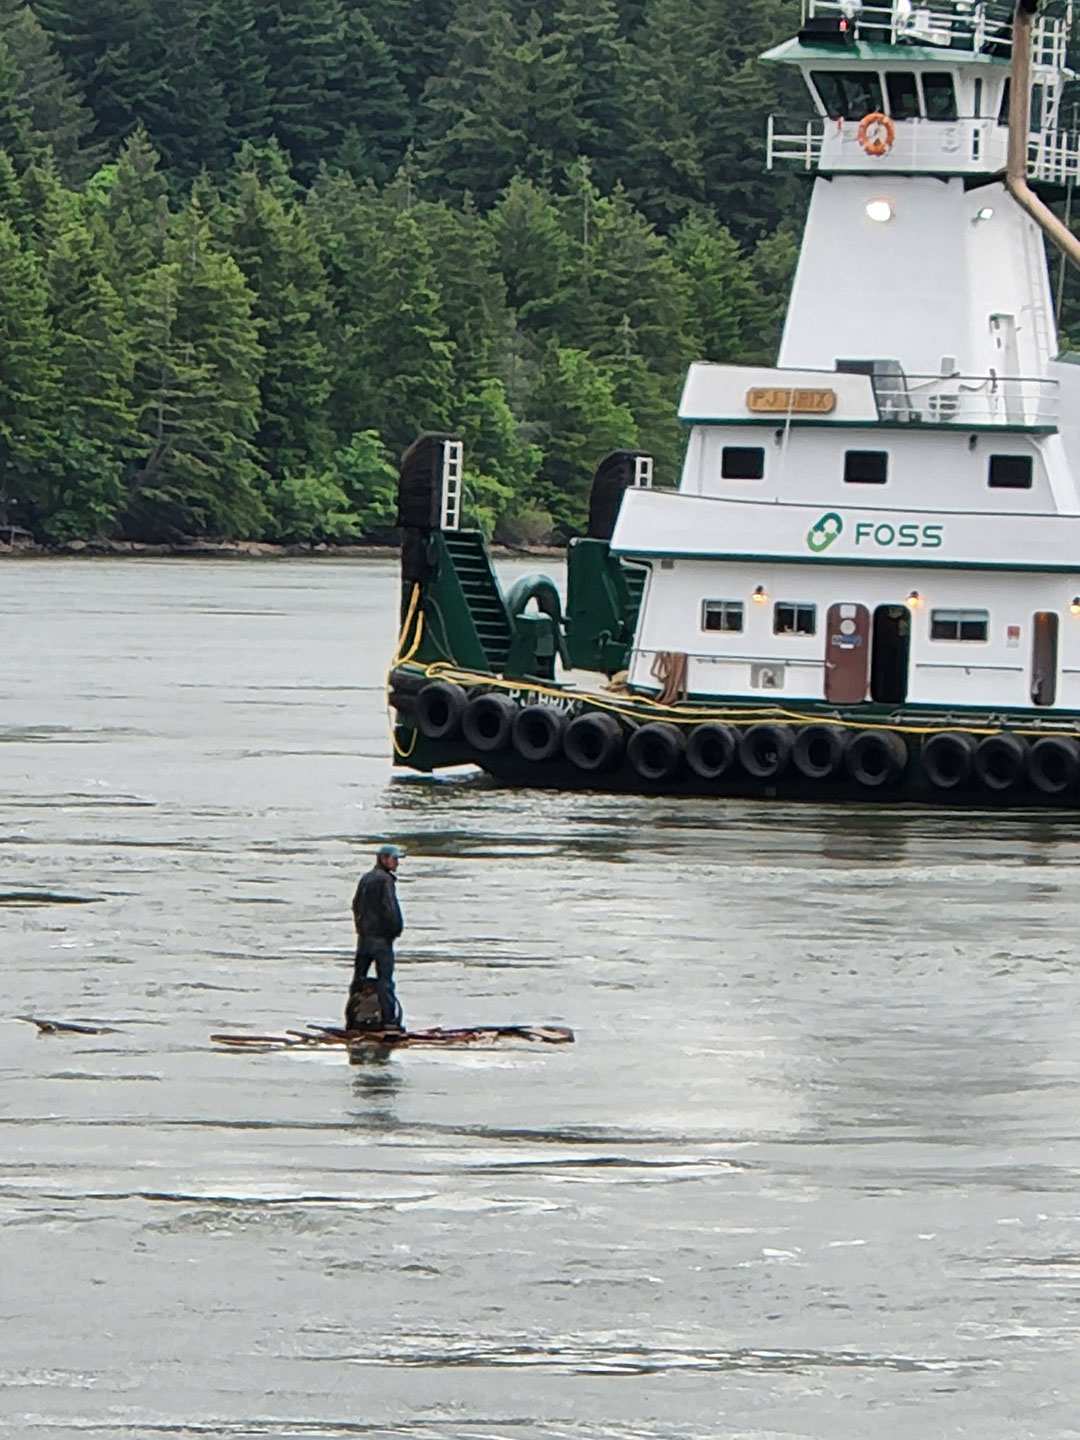 Foss tugboat crews rescued a man floating down the Columbia River early on June 3. He told crewmembers he had been on the float for nearly 24 hours. He was not injured during the ordeal. 